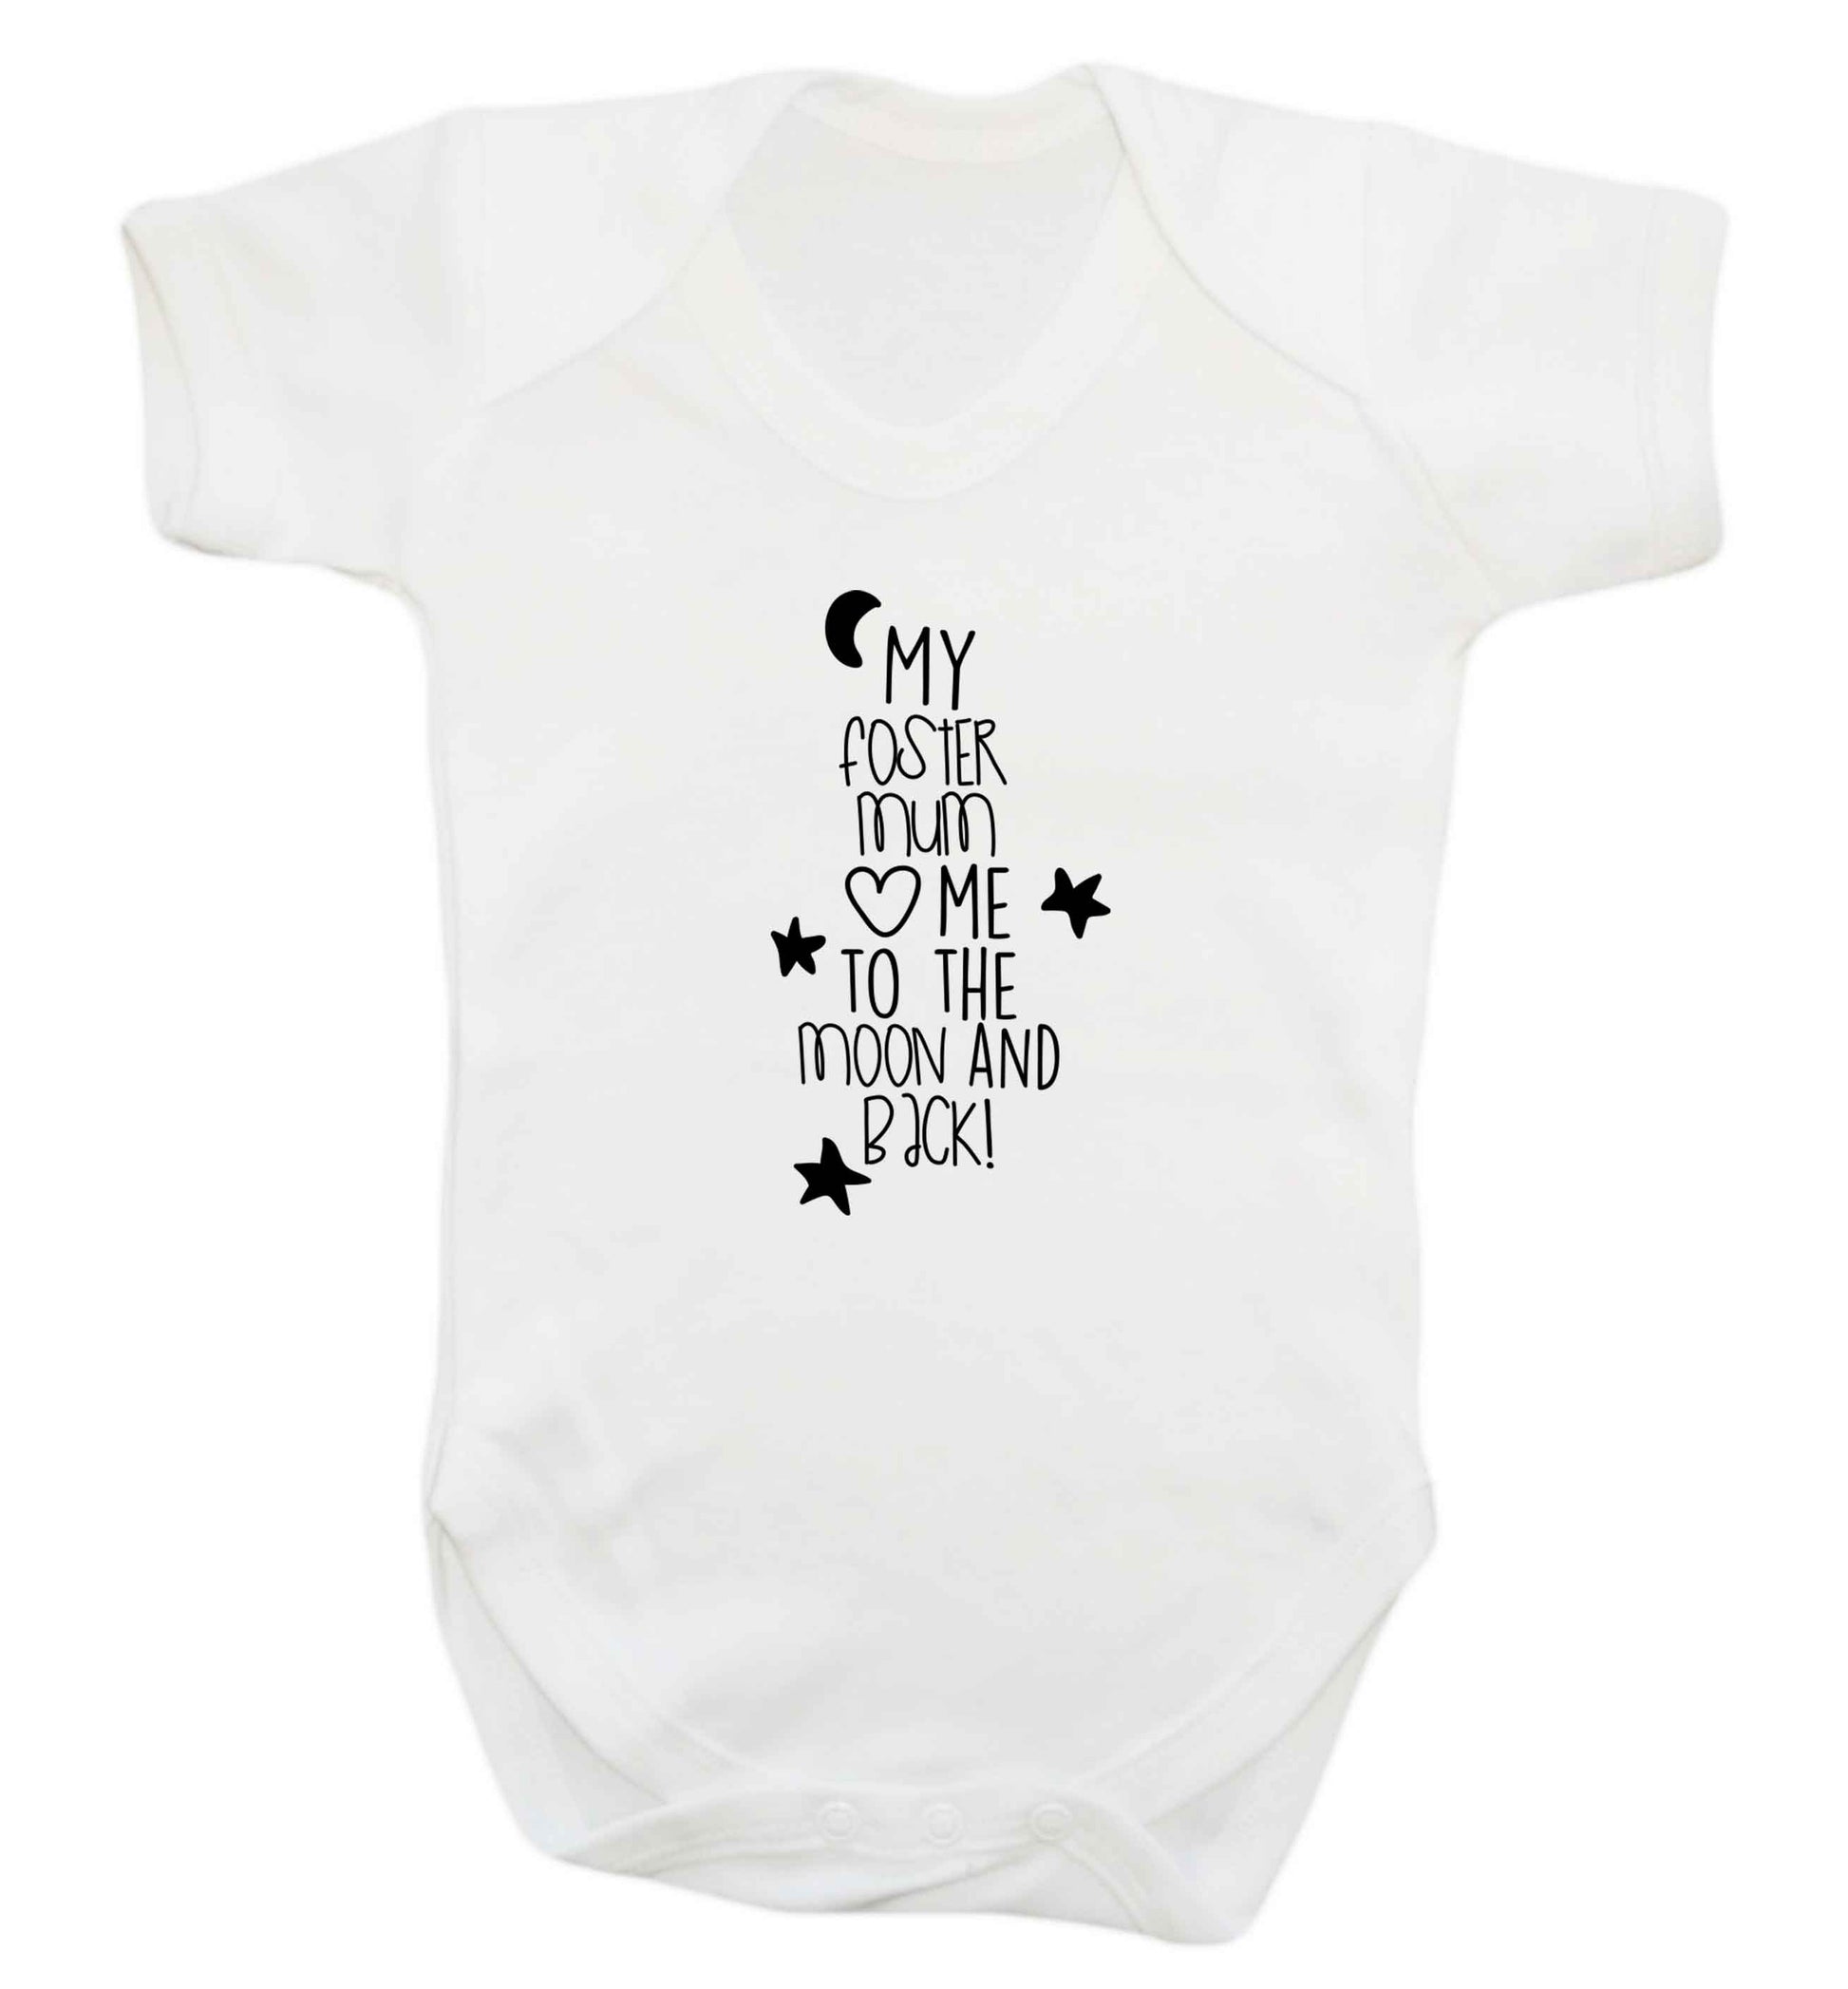 My foster mum loves me to the moon and back baby vest white 18-24 months